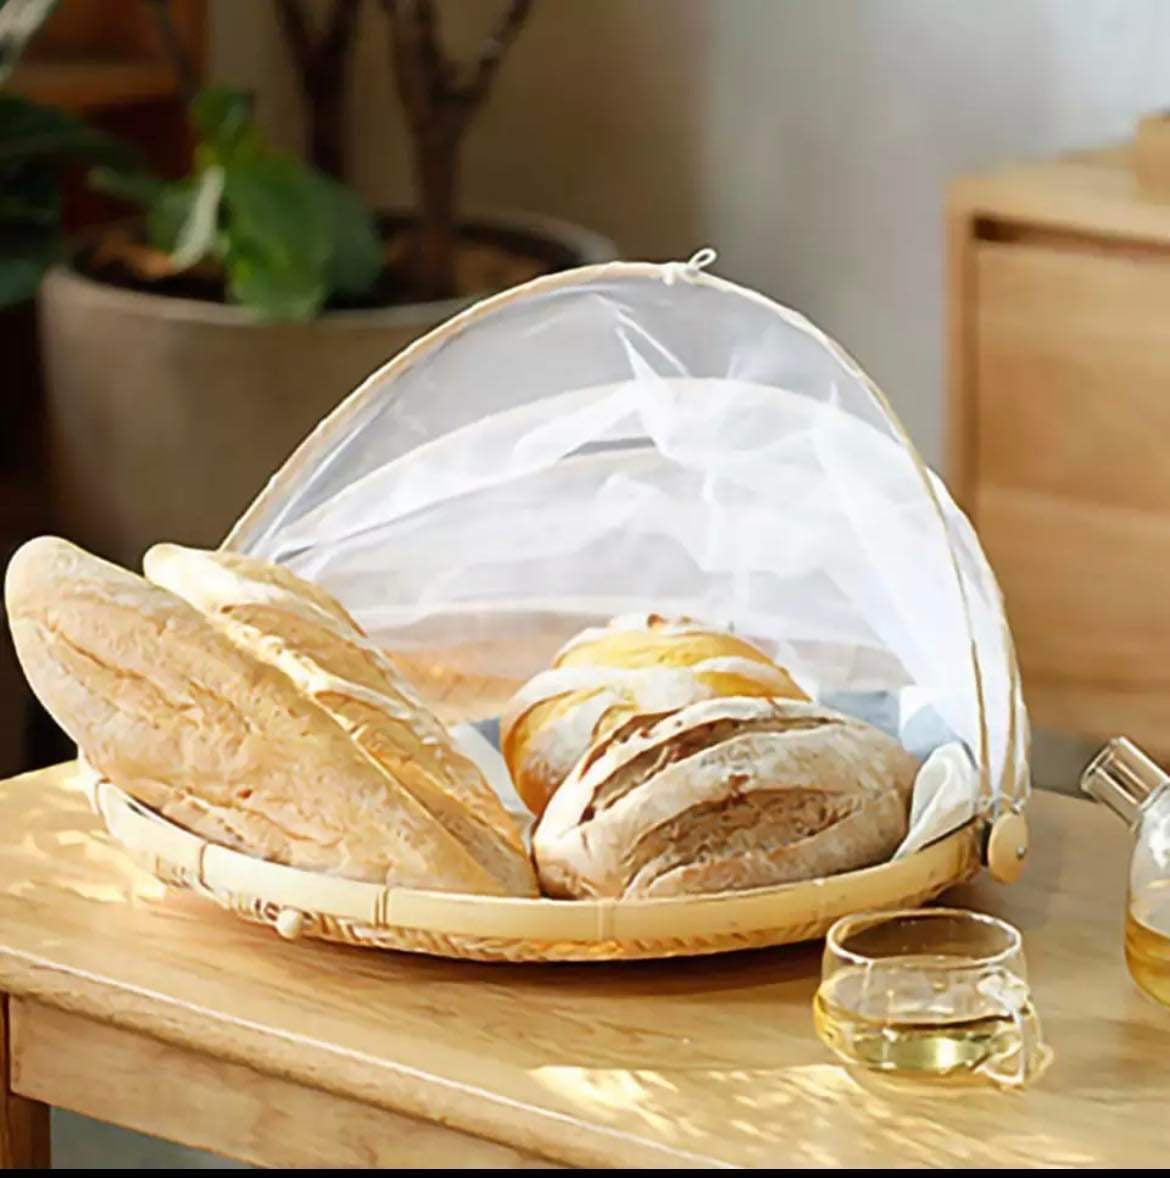 Portable food serving tray with mesh cover